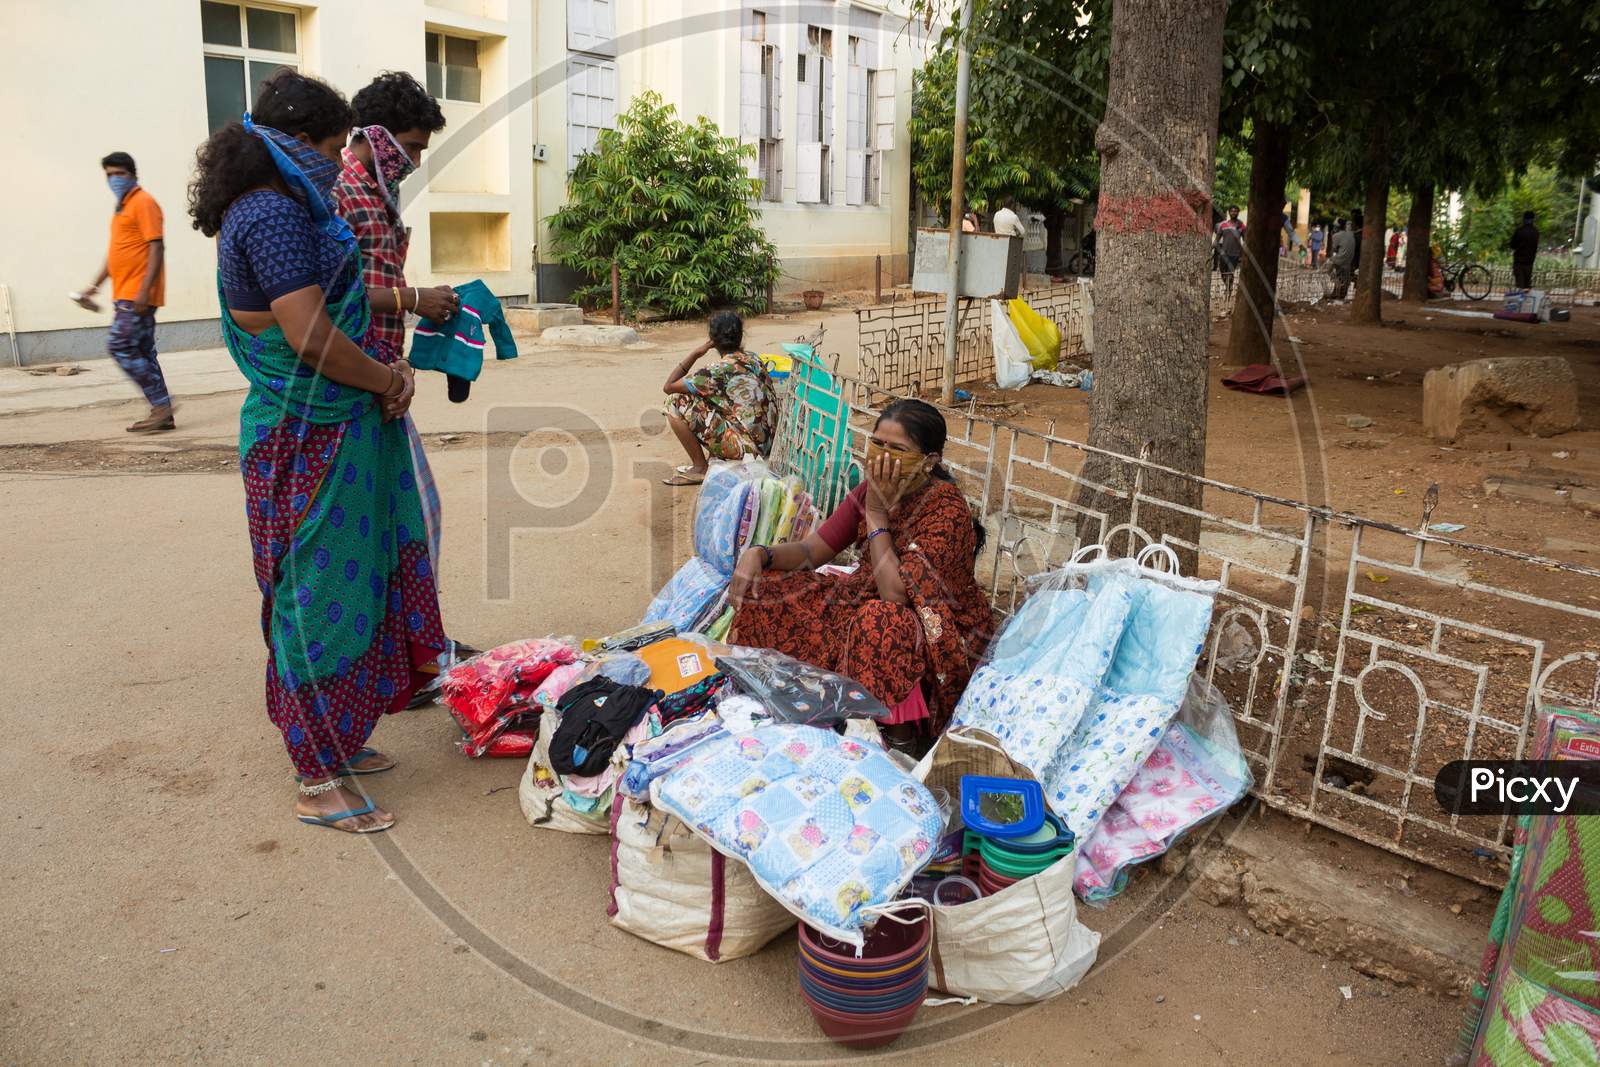 A Street Vendor selling essential clothing and Masks in KR Hospital in Mysore/Karnataka.